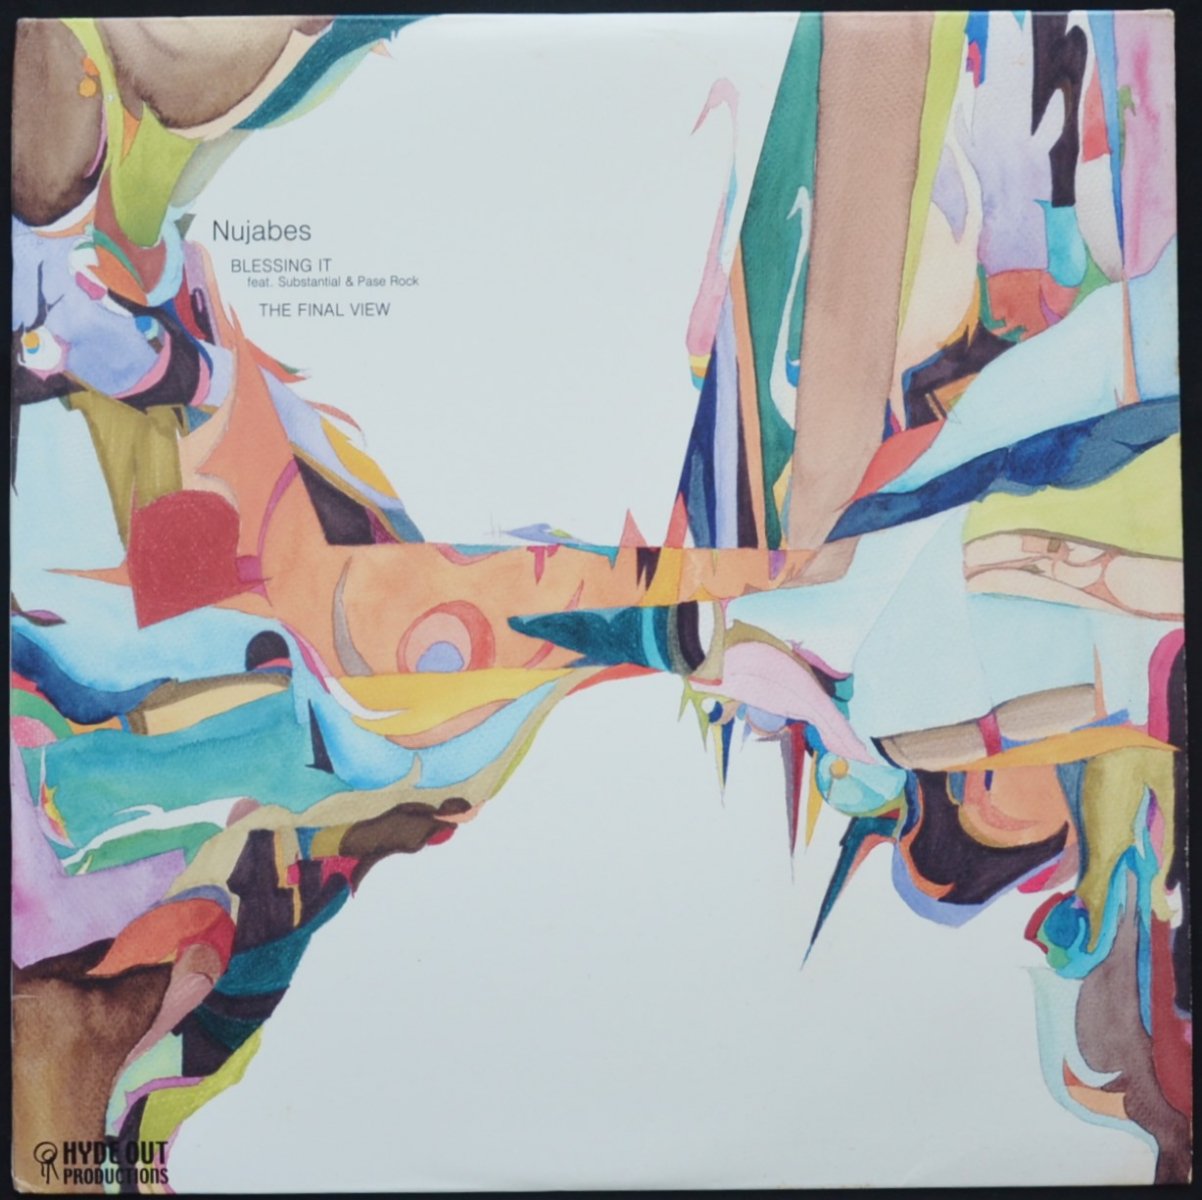 NUJABES FEATURING PASE ROCK AND SUBSTANTIAL / BLESSING IT / THE 